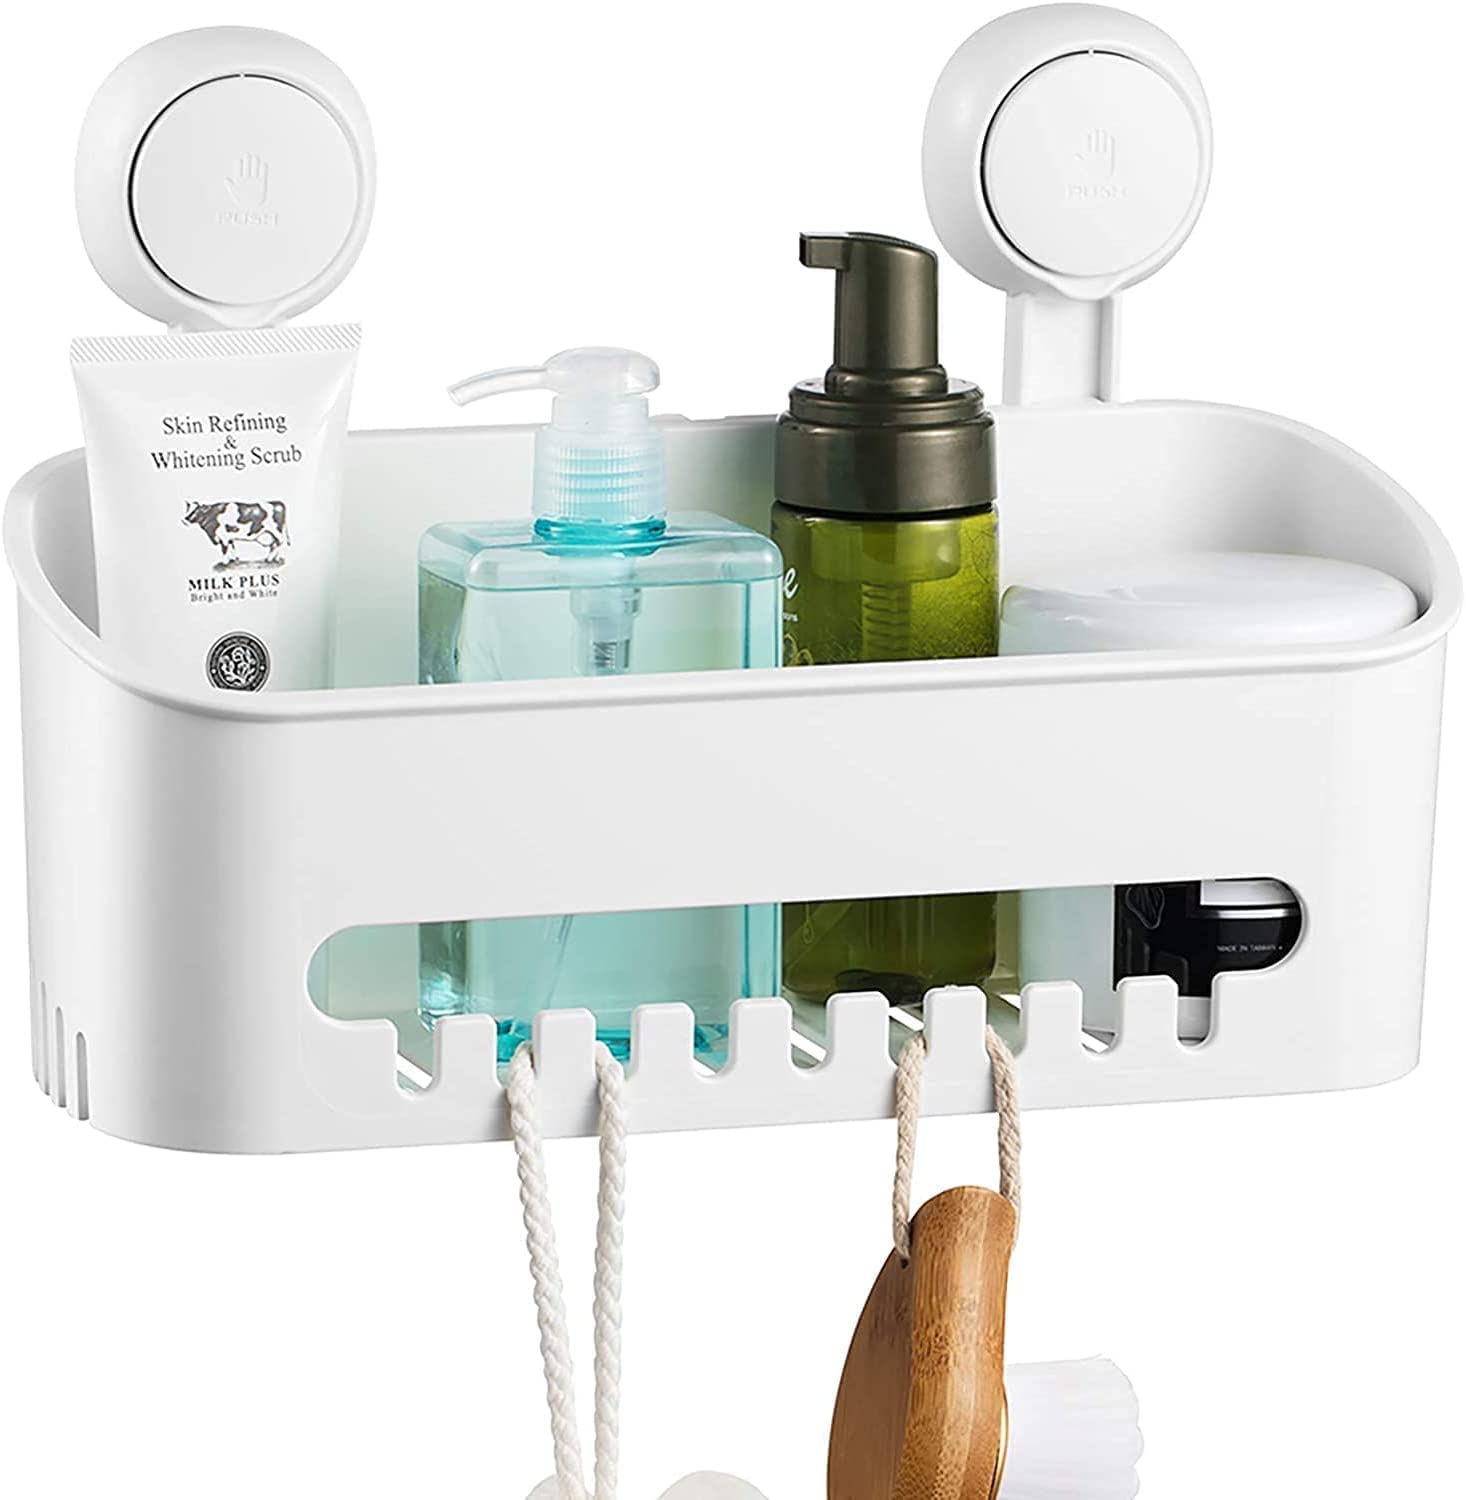 Image shows the shower caddy with bathroom products in it.